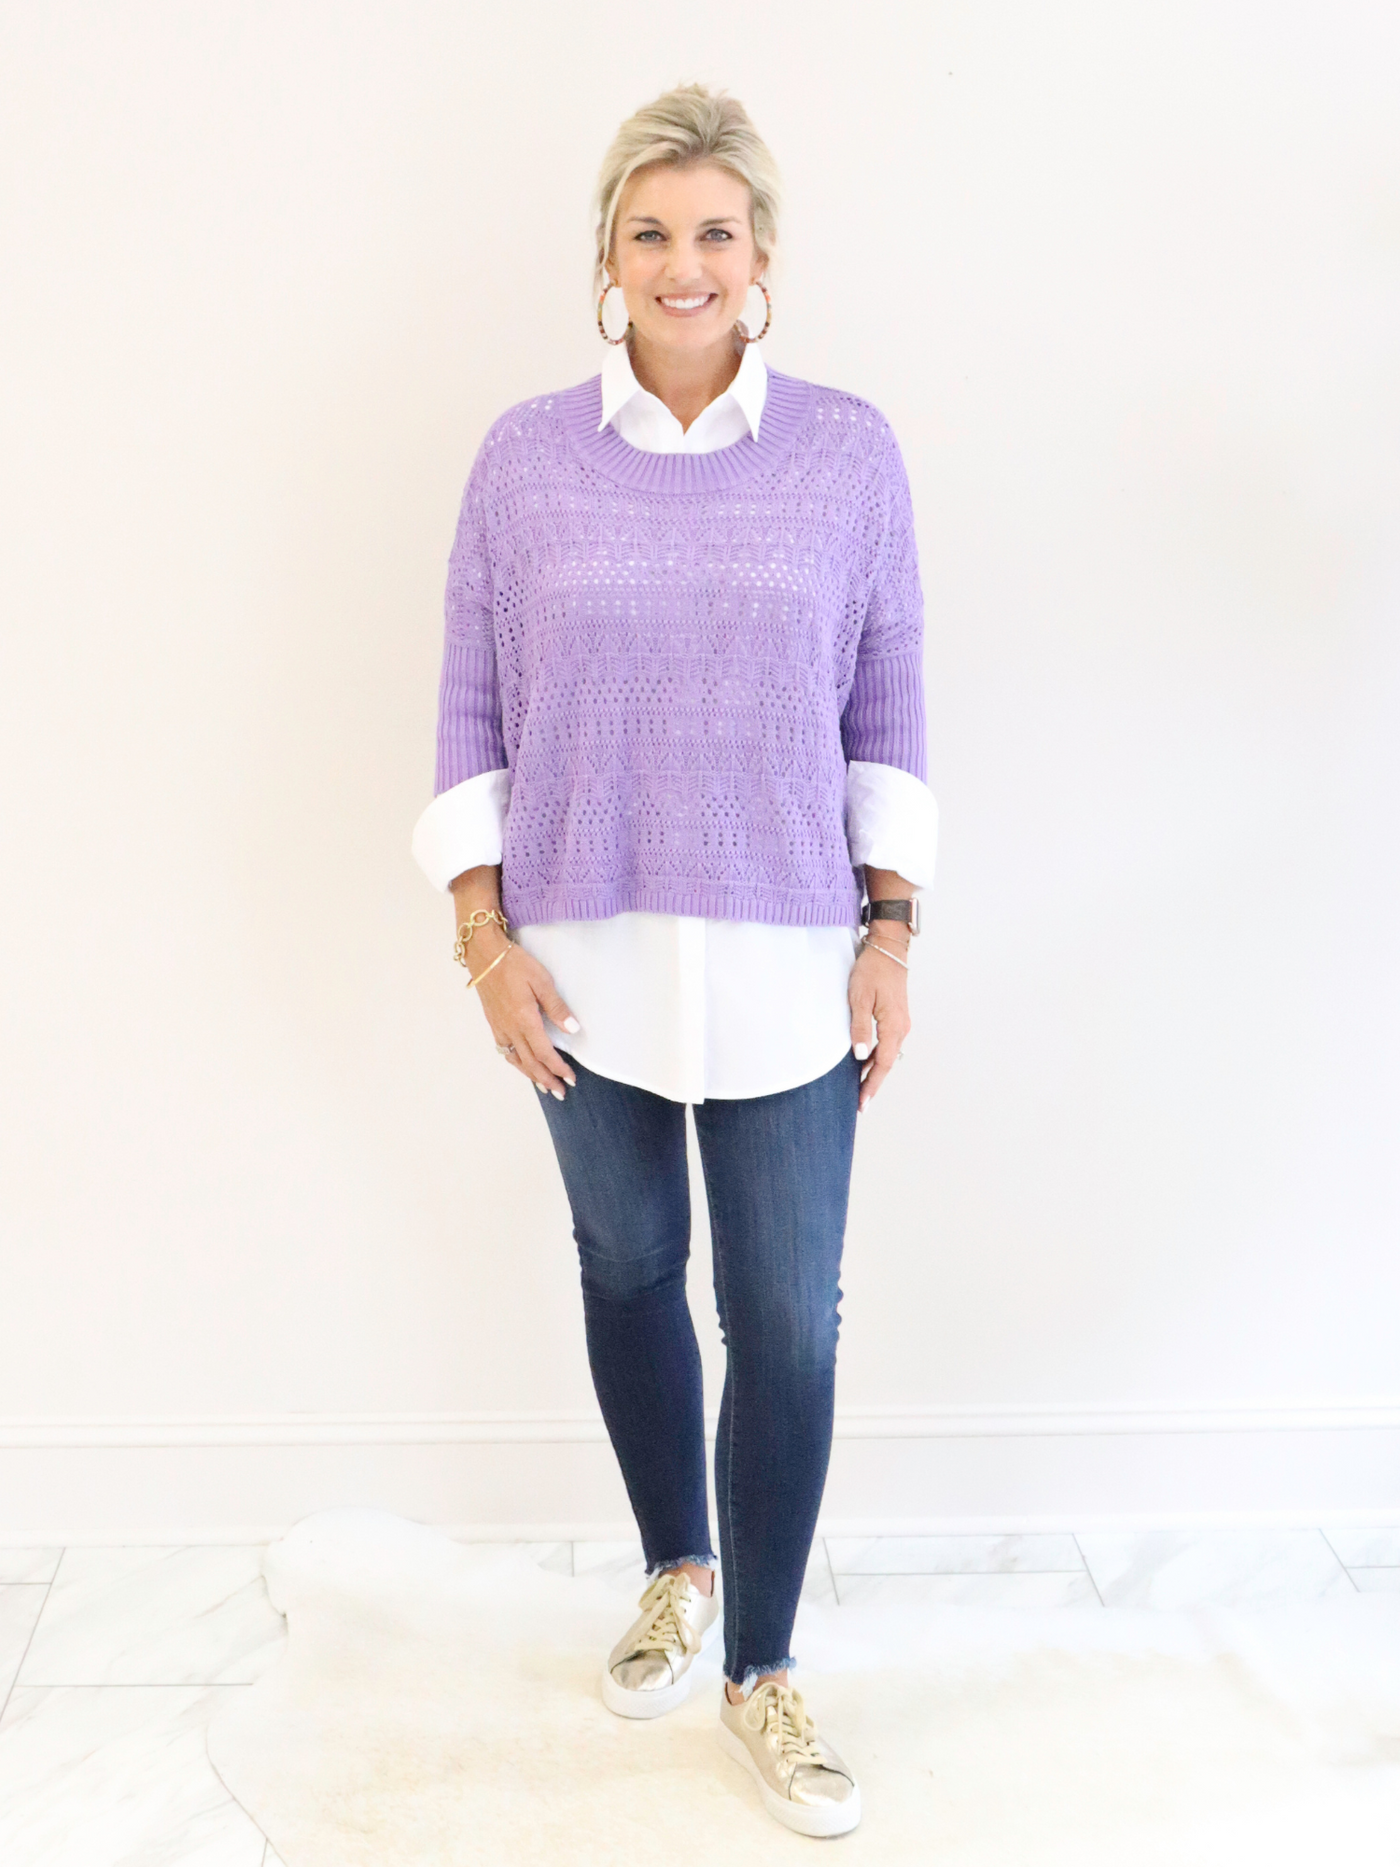 Reina Crochet 3/4 Sleeve Sweater Lavender front view. paired with a white collared shirt and denim.